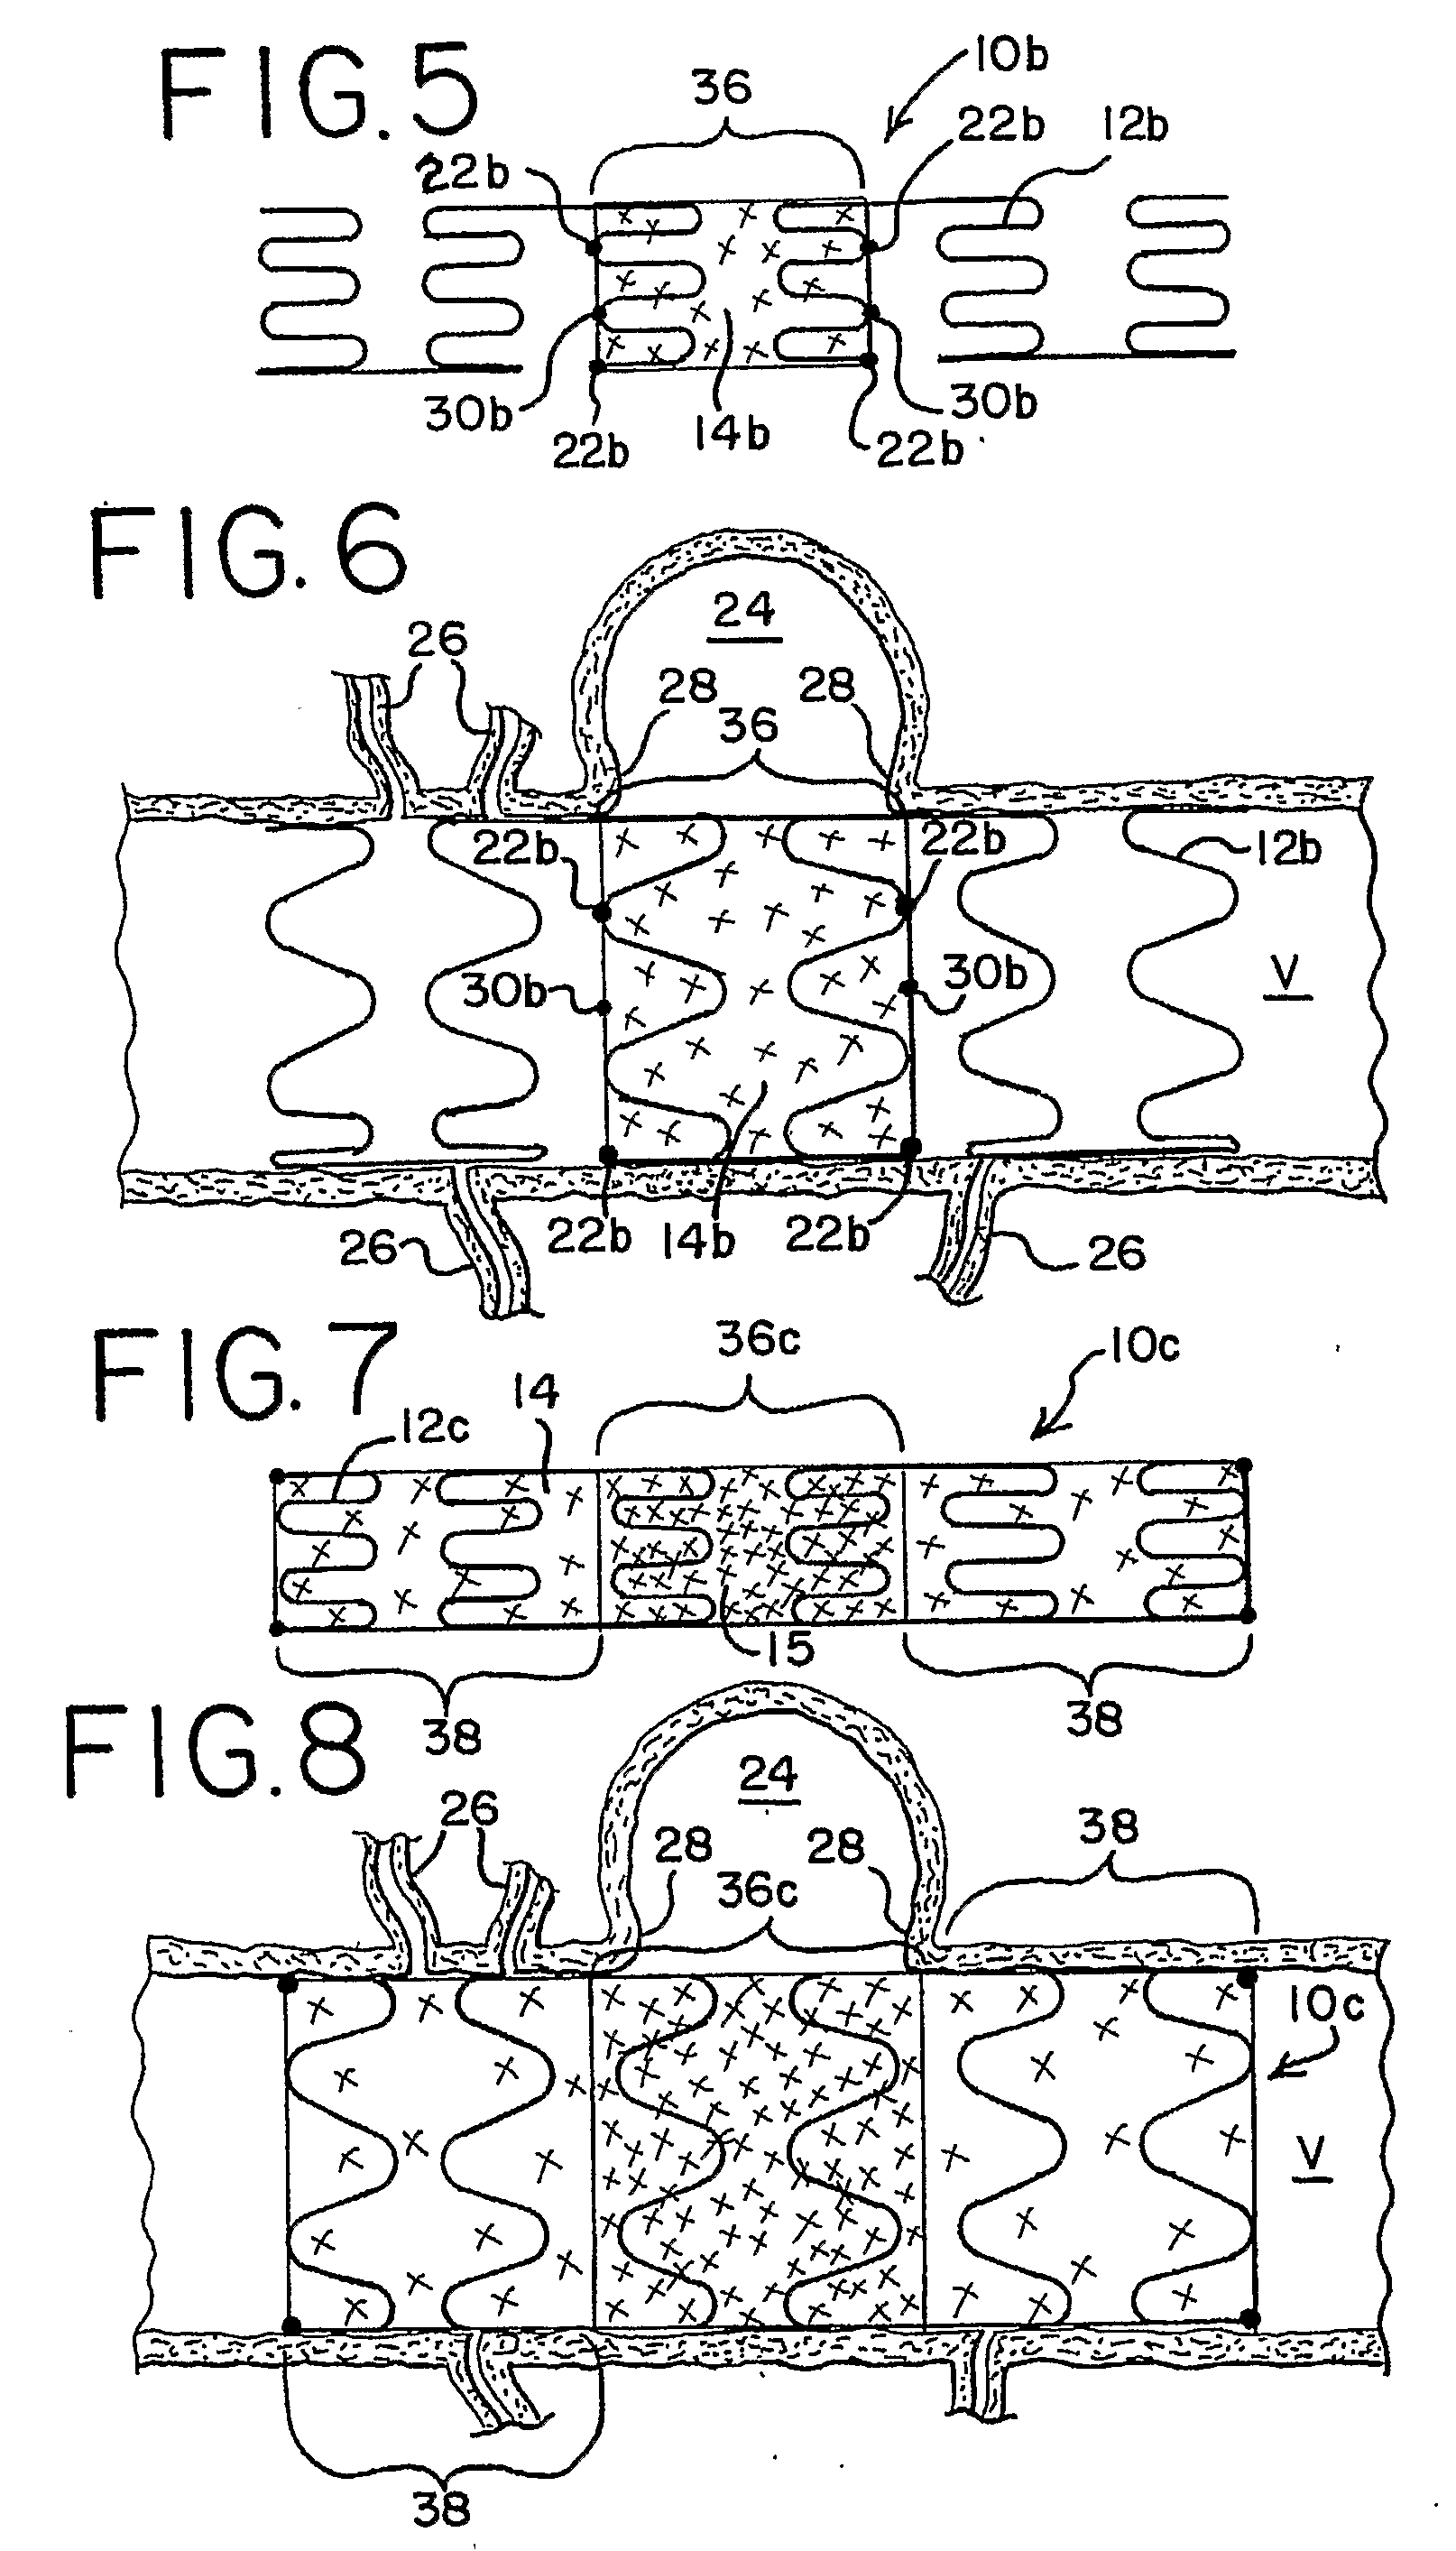 Thin Film Devices for Occlusion of a Vessel